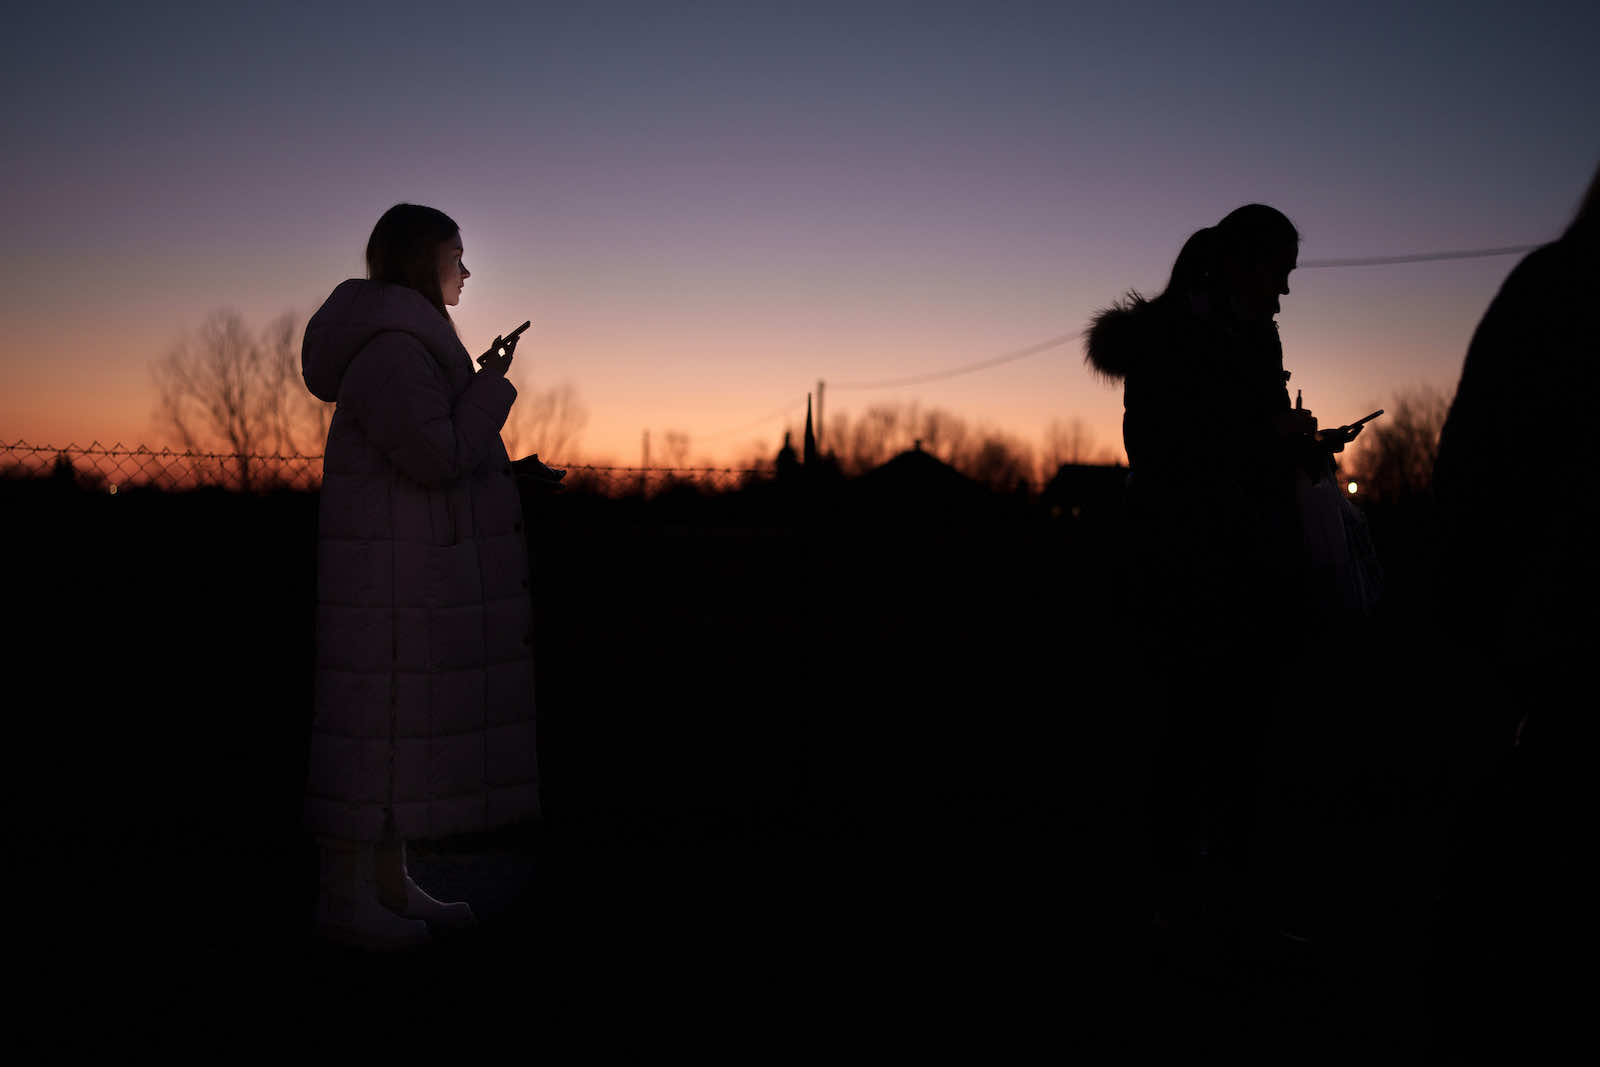 Refugees fleeing Ukraine use their smart phones to make calls and send messages at the border crossing on 13 March, Velke Slemence, Slovakia (Christopher Furlong/Getty Images)